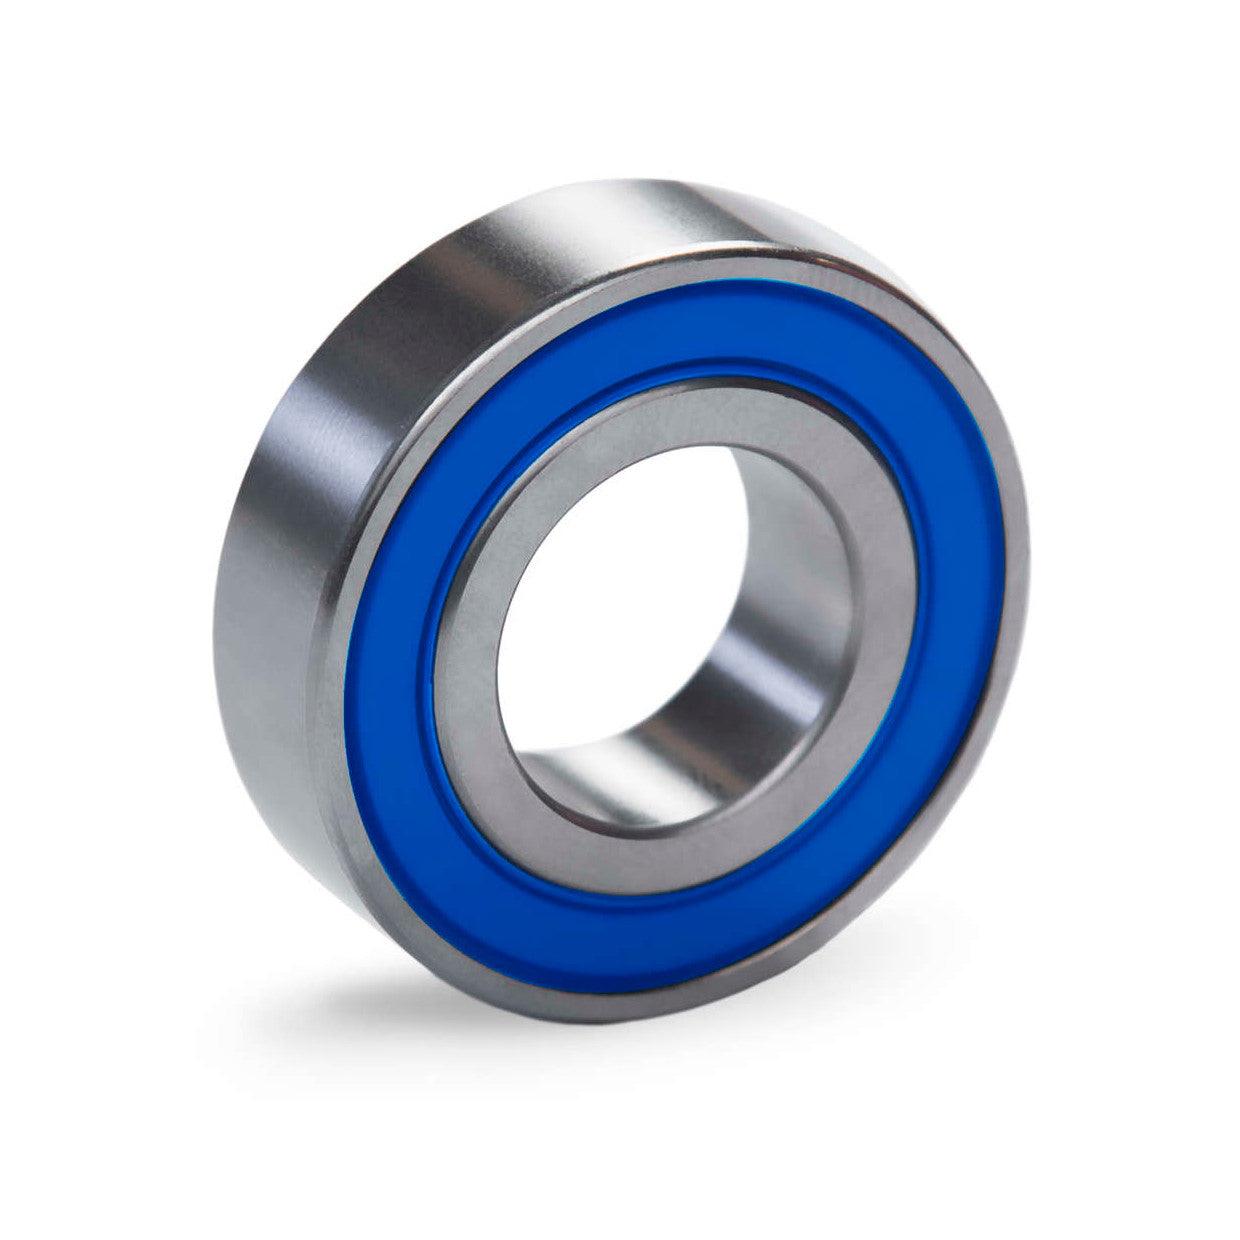 Blueseal Bike Bearings™ | Wheels, Hubs & More | All Sizes & Codes - Trailvision - Bicycle Bearing Suppliers